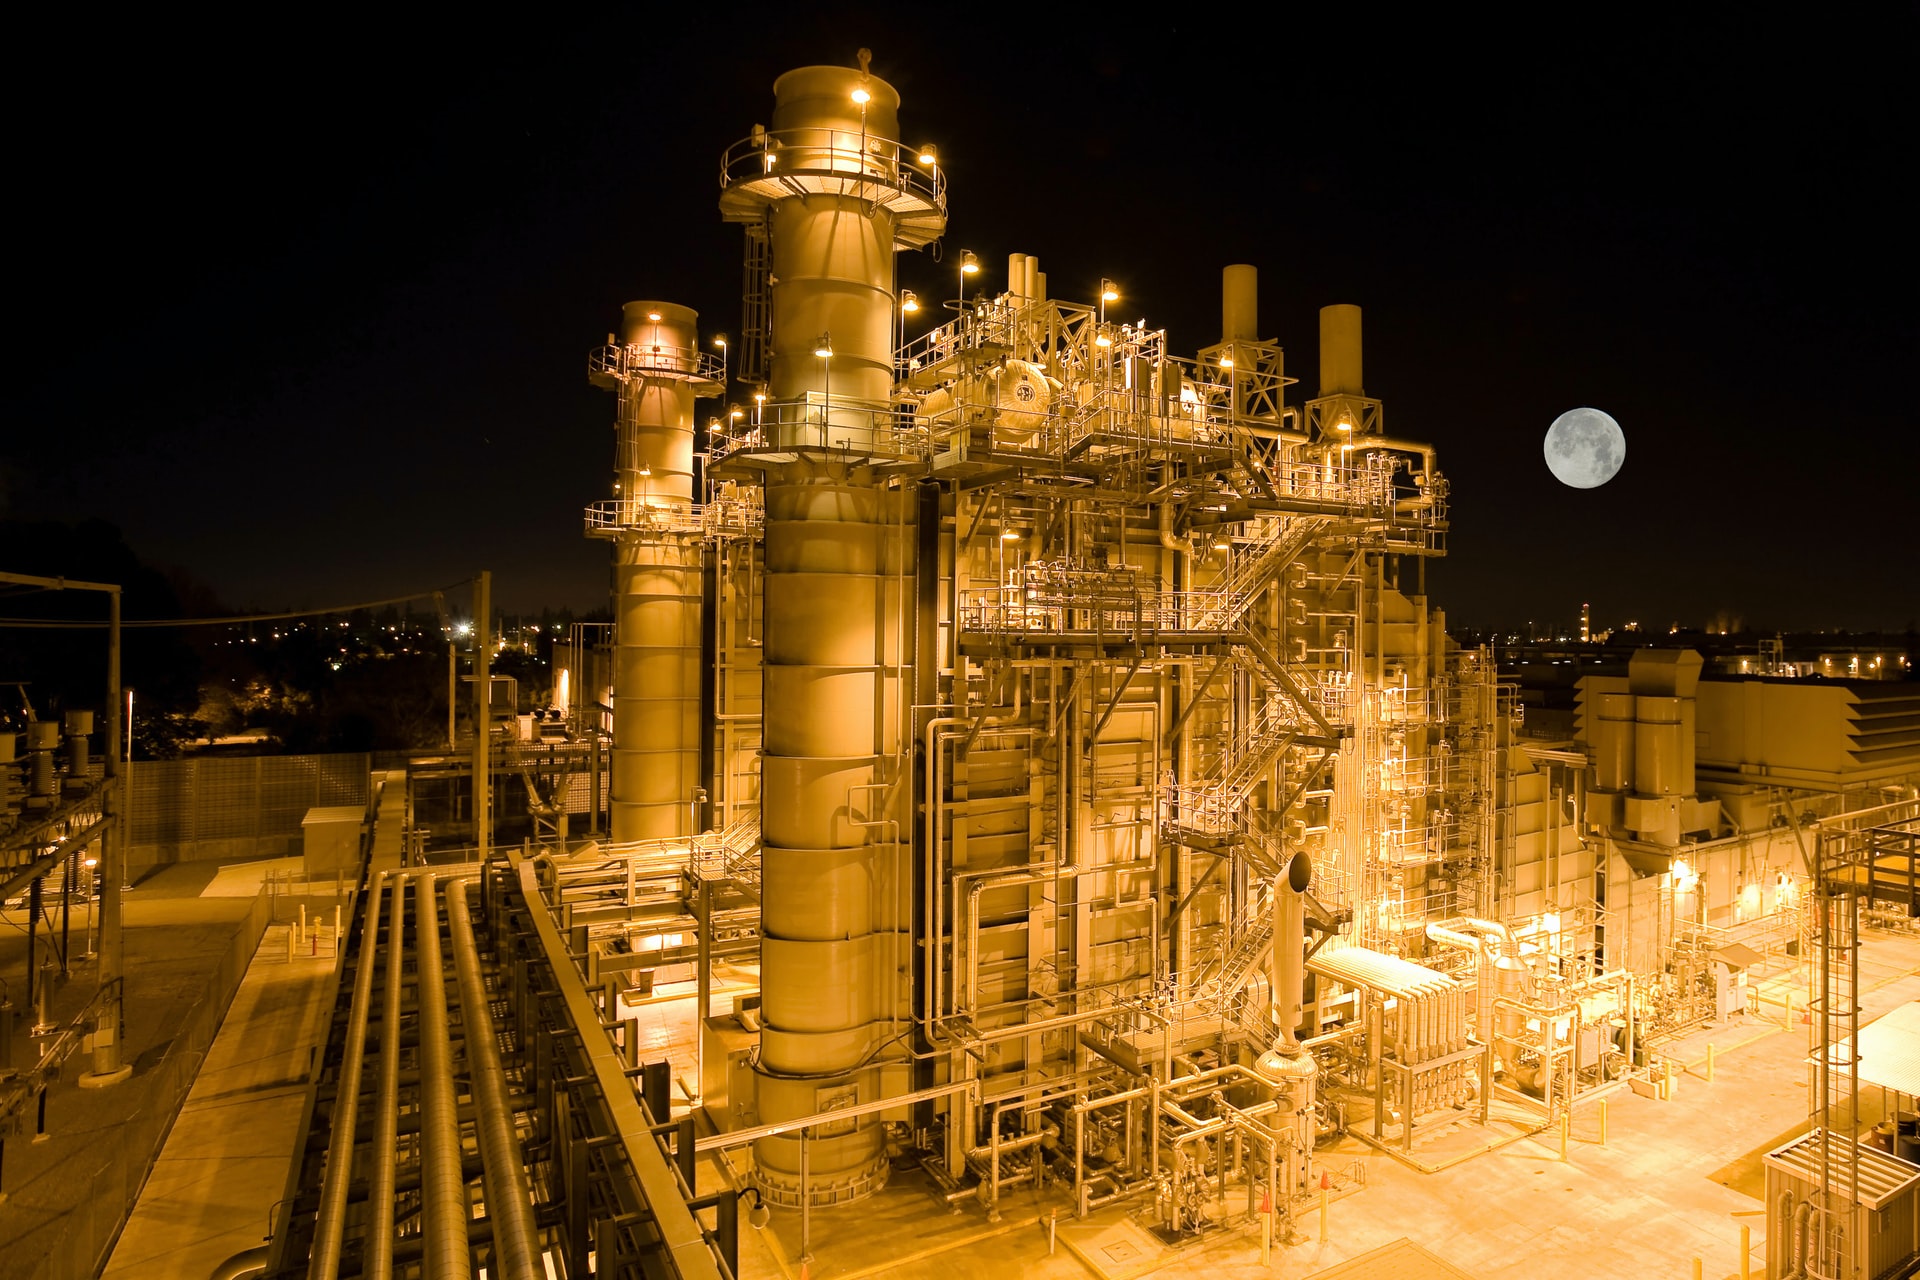 An aerial view of a power plant at night, with the moon in the background